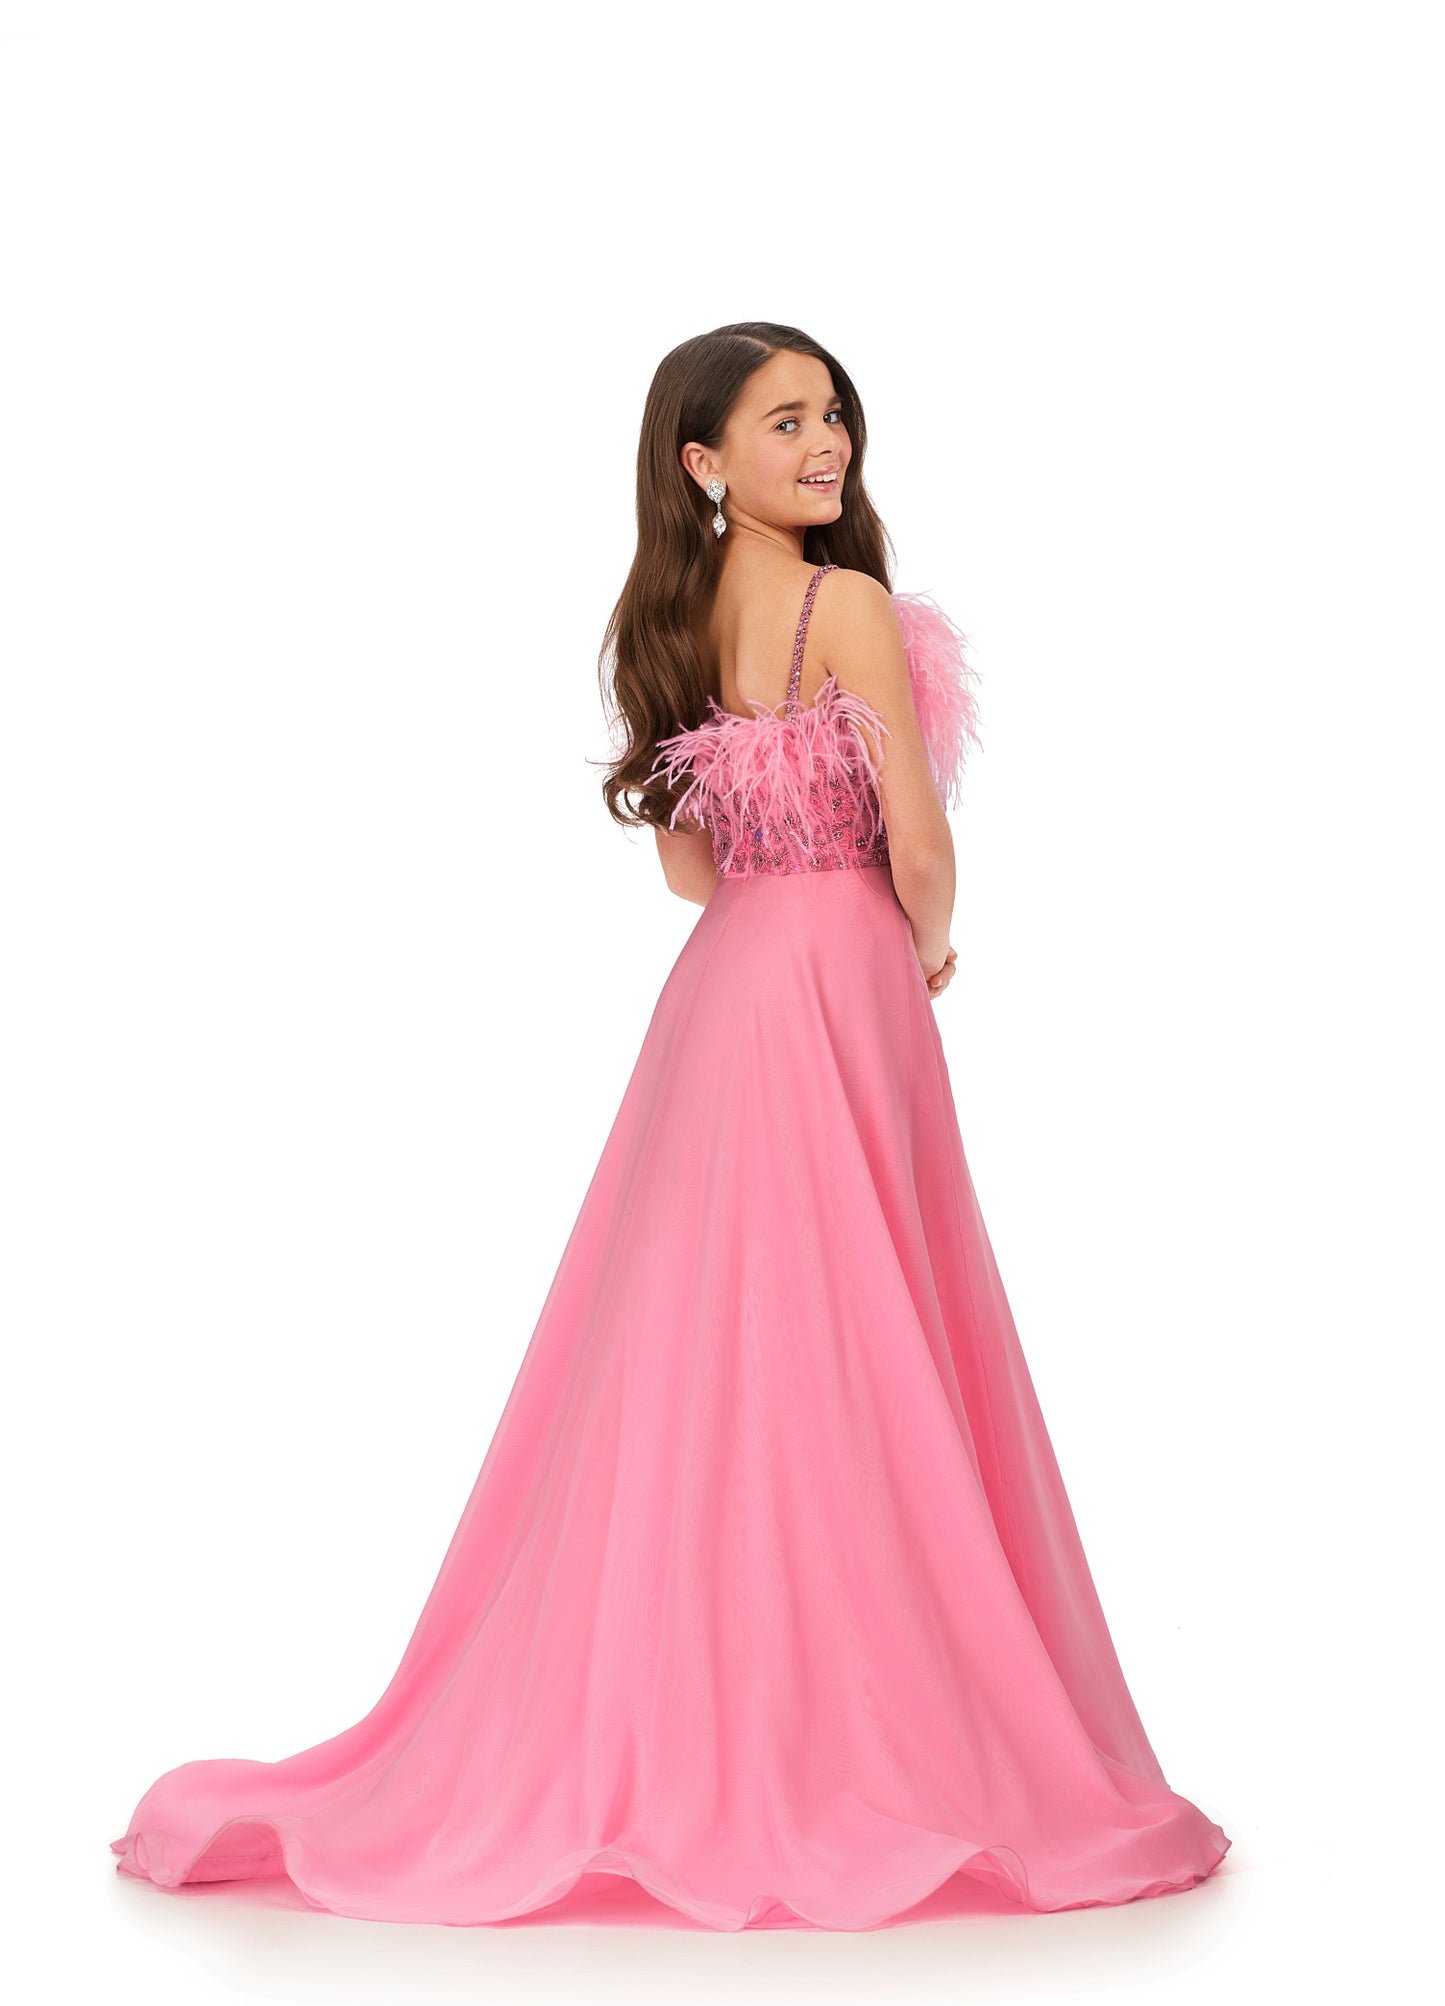 The Ashley Lauren Kids 8236 Long Girls A Line Chiffon Feather Beaded Pageant Ballgown Dress is the perfect choice for pageants. Featuring a beaded bustier and feather details, this A-Line dress with spaghetti straps is sure to stand out. Show-stoppingly beautiful.  Sizes: 4-16  Colors: Red, Ivory, Candy Pink